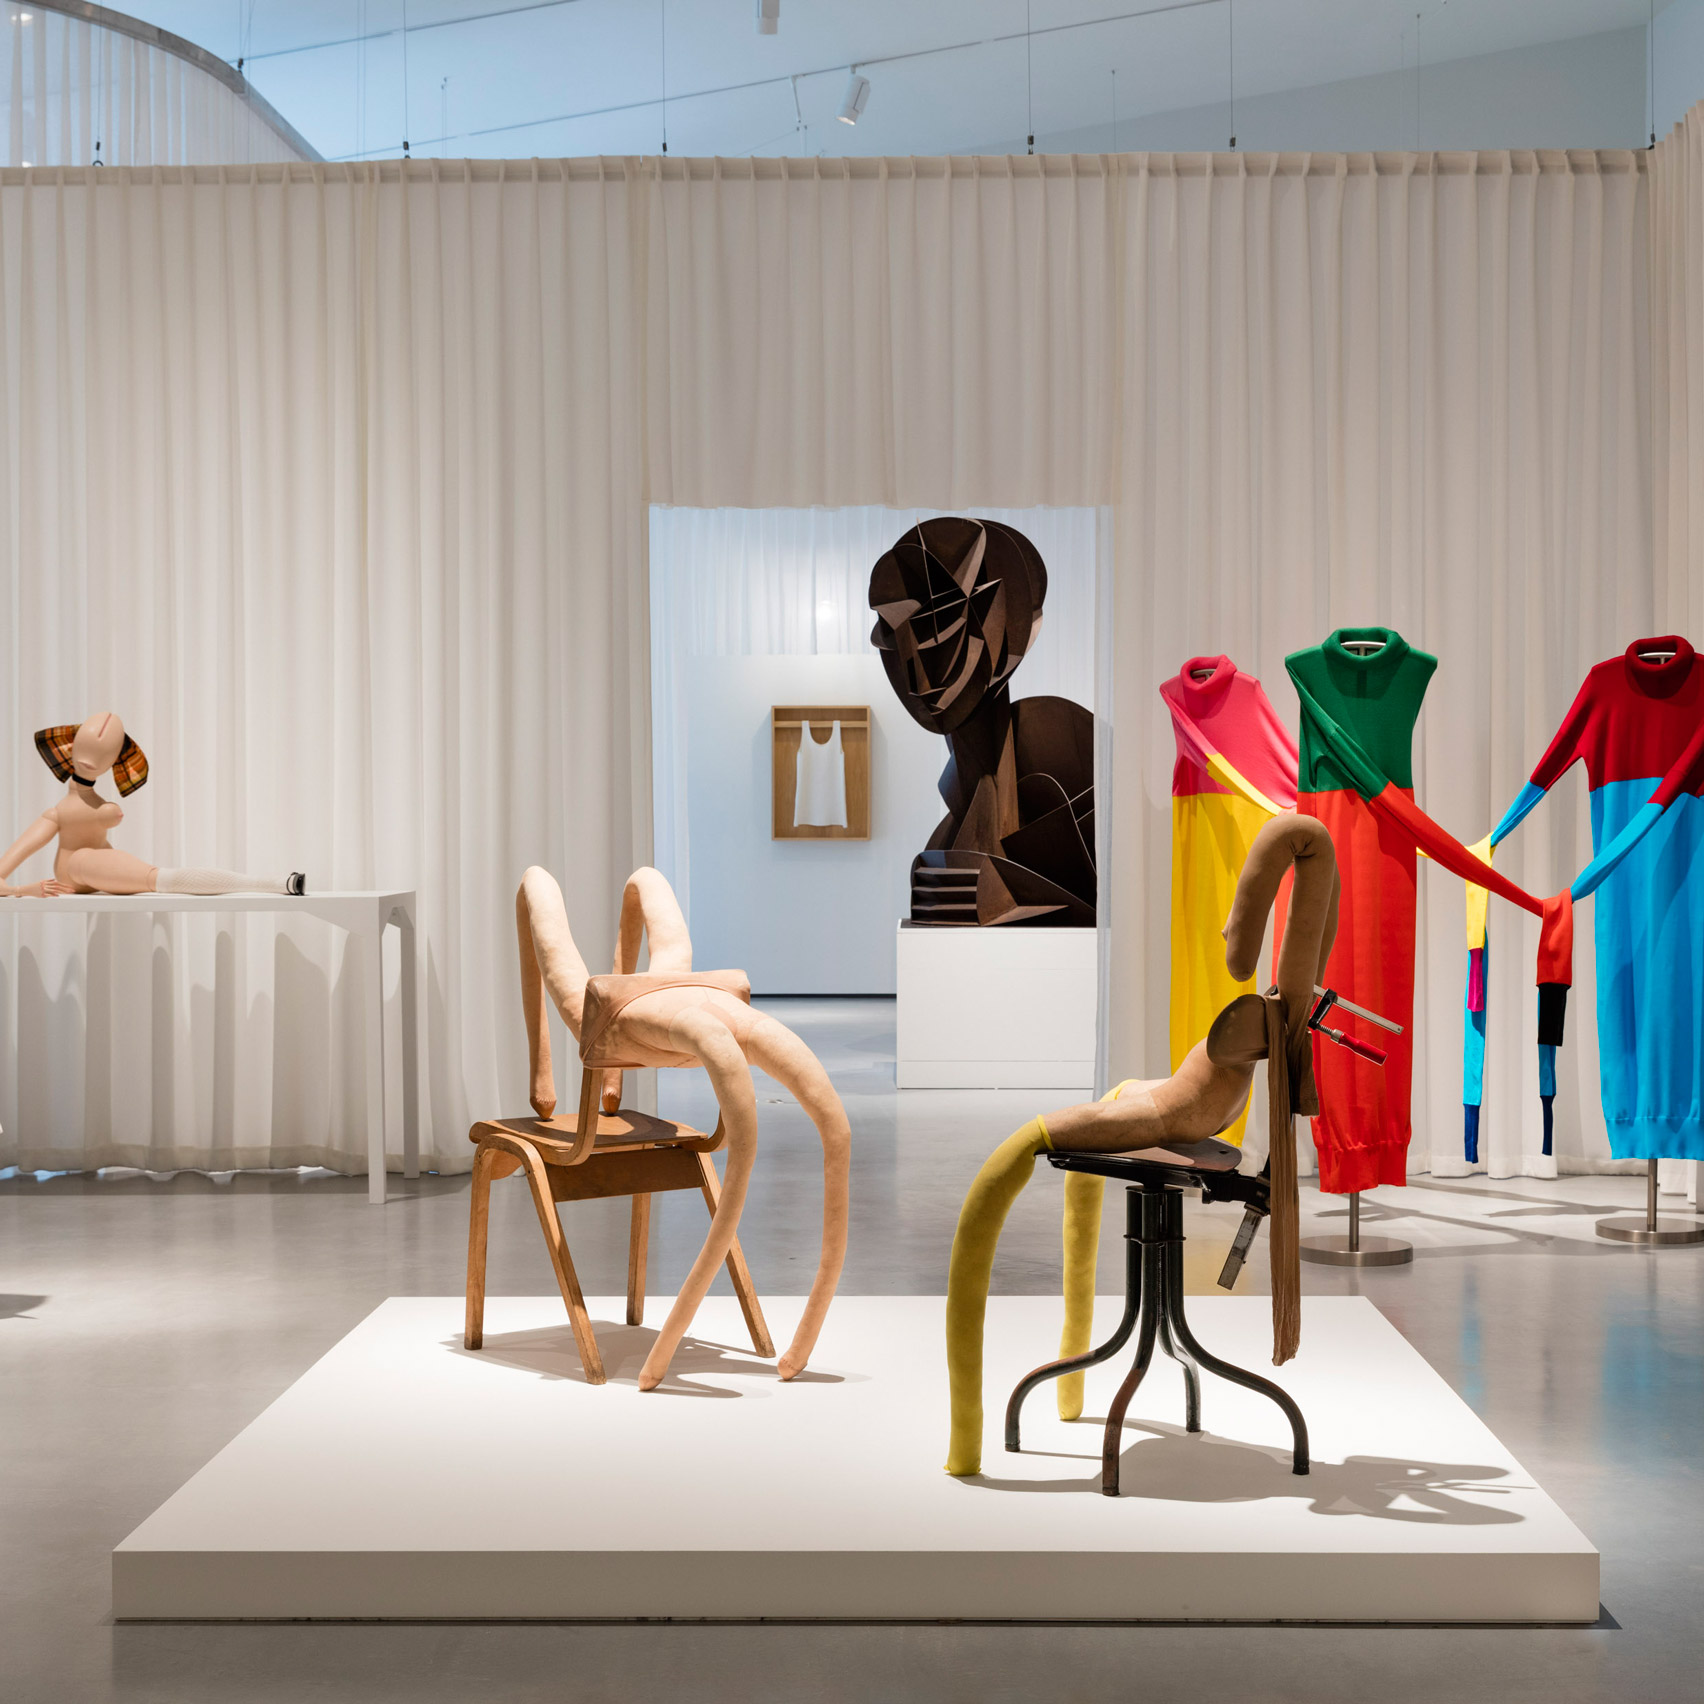 Jw Anderson Examines The Human Form For Disobedient Bodies Exhibition At The Hepworth